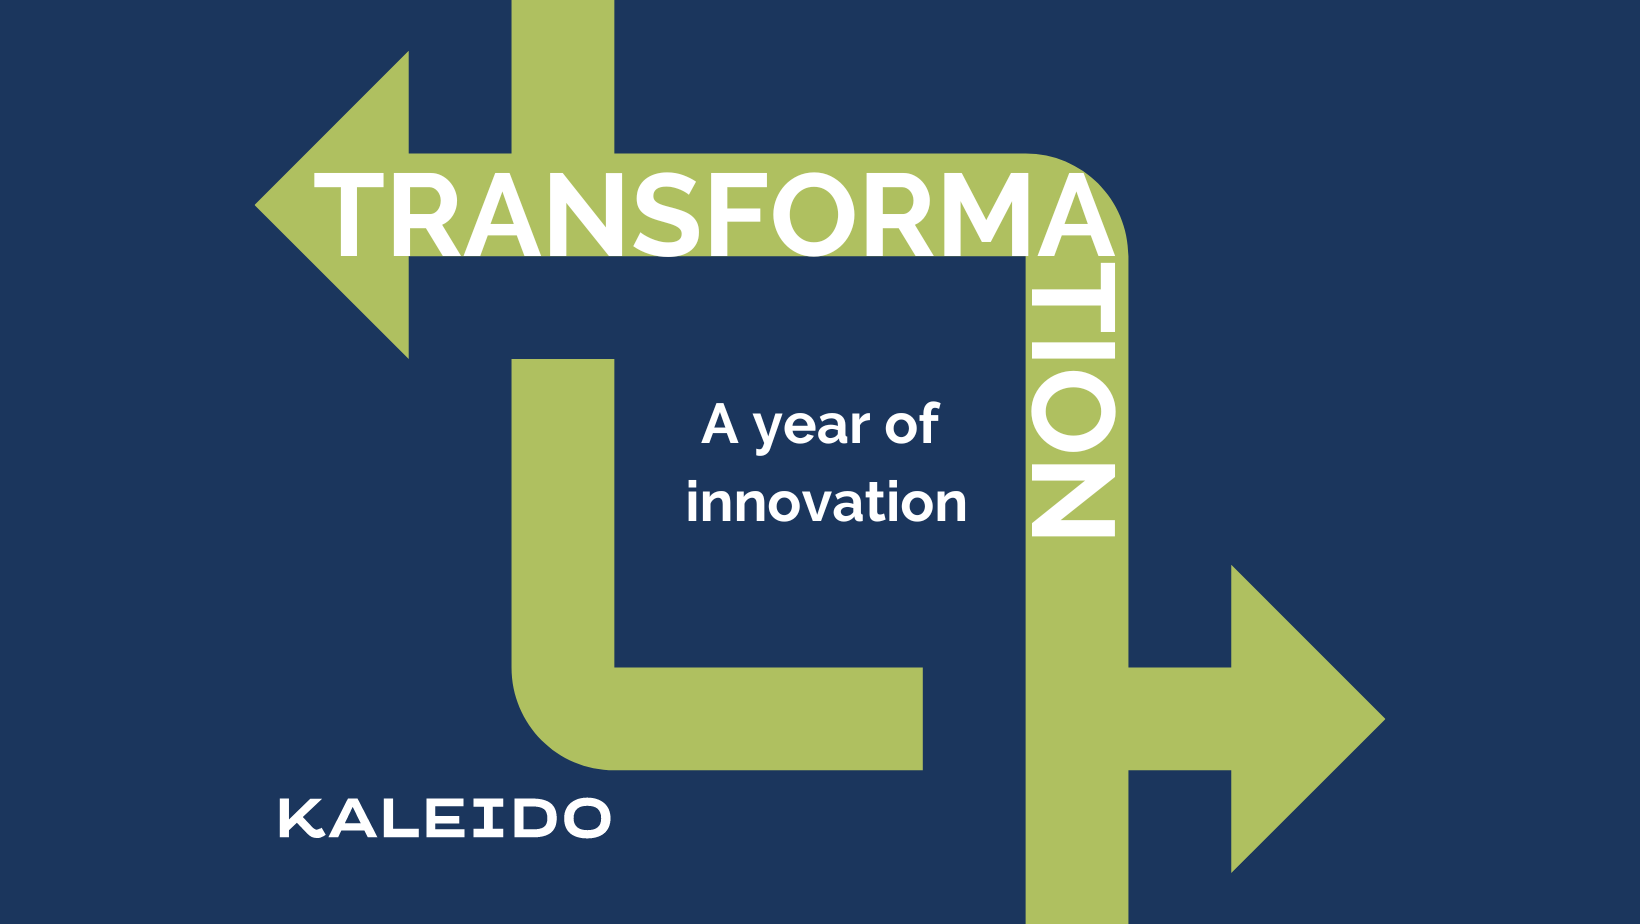 A year of growth: Thanks to our clients for choosing Kaleido